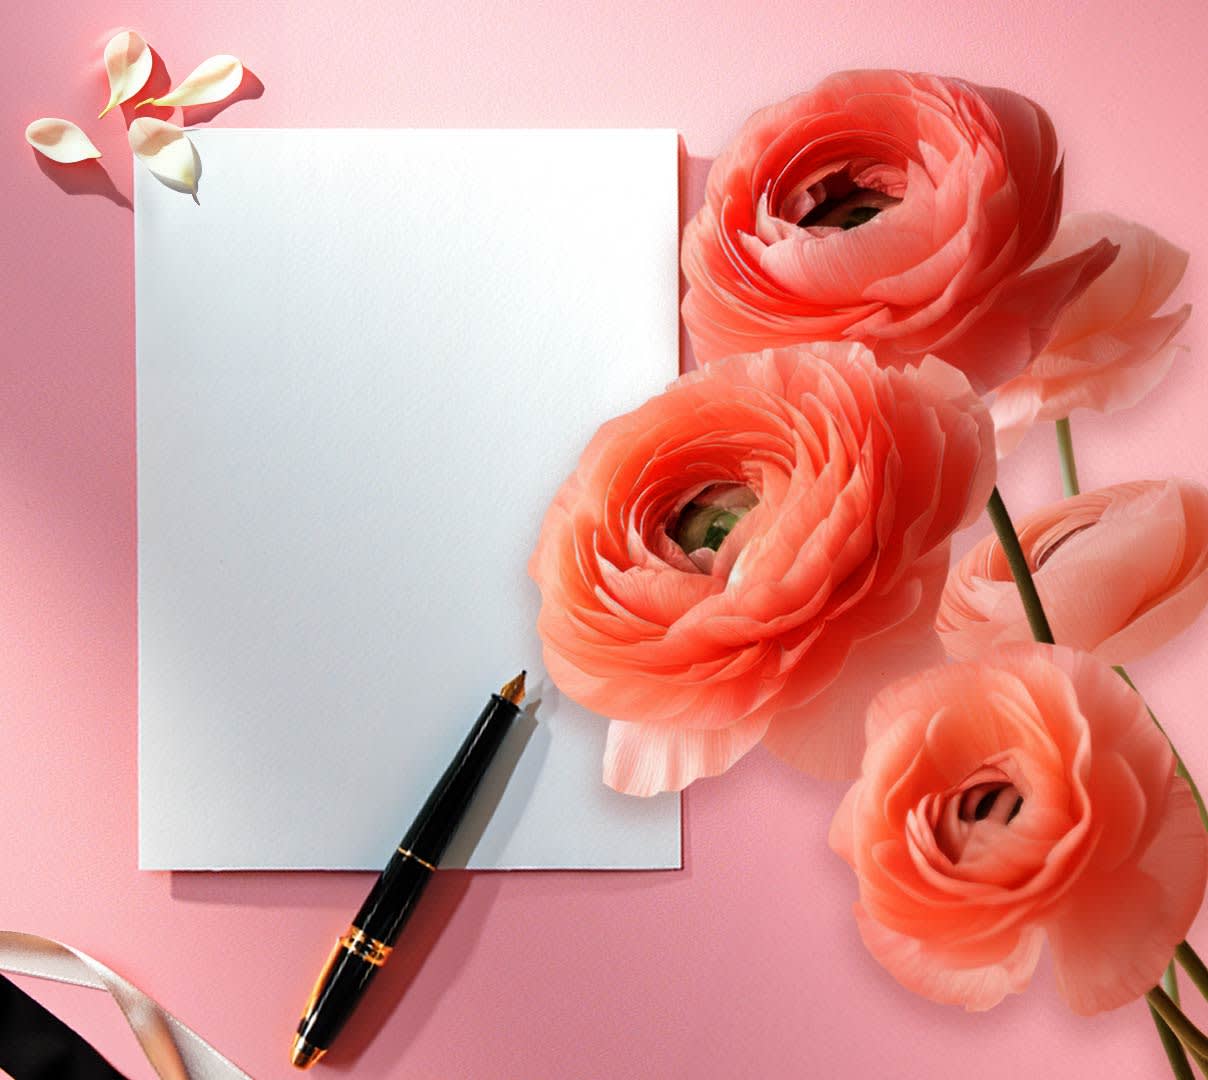 Mx Blog - A Florist's Guide to Flower Card Messages and Meanings - hero image of flowers and writing pad